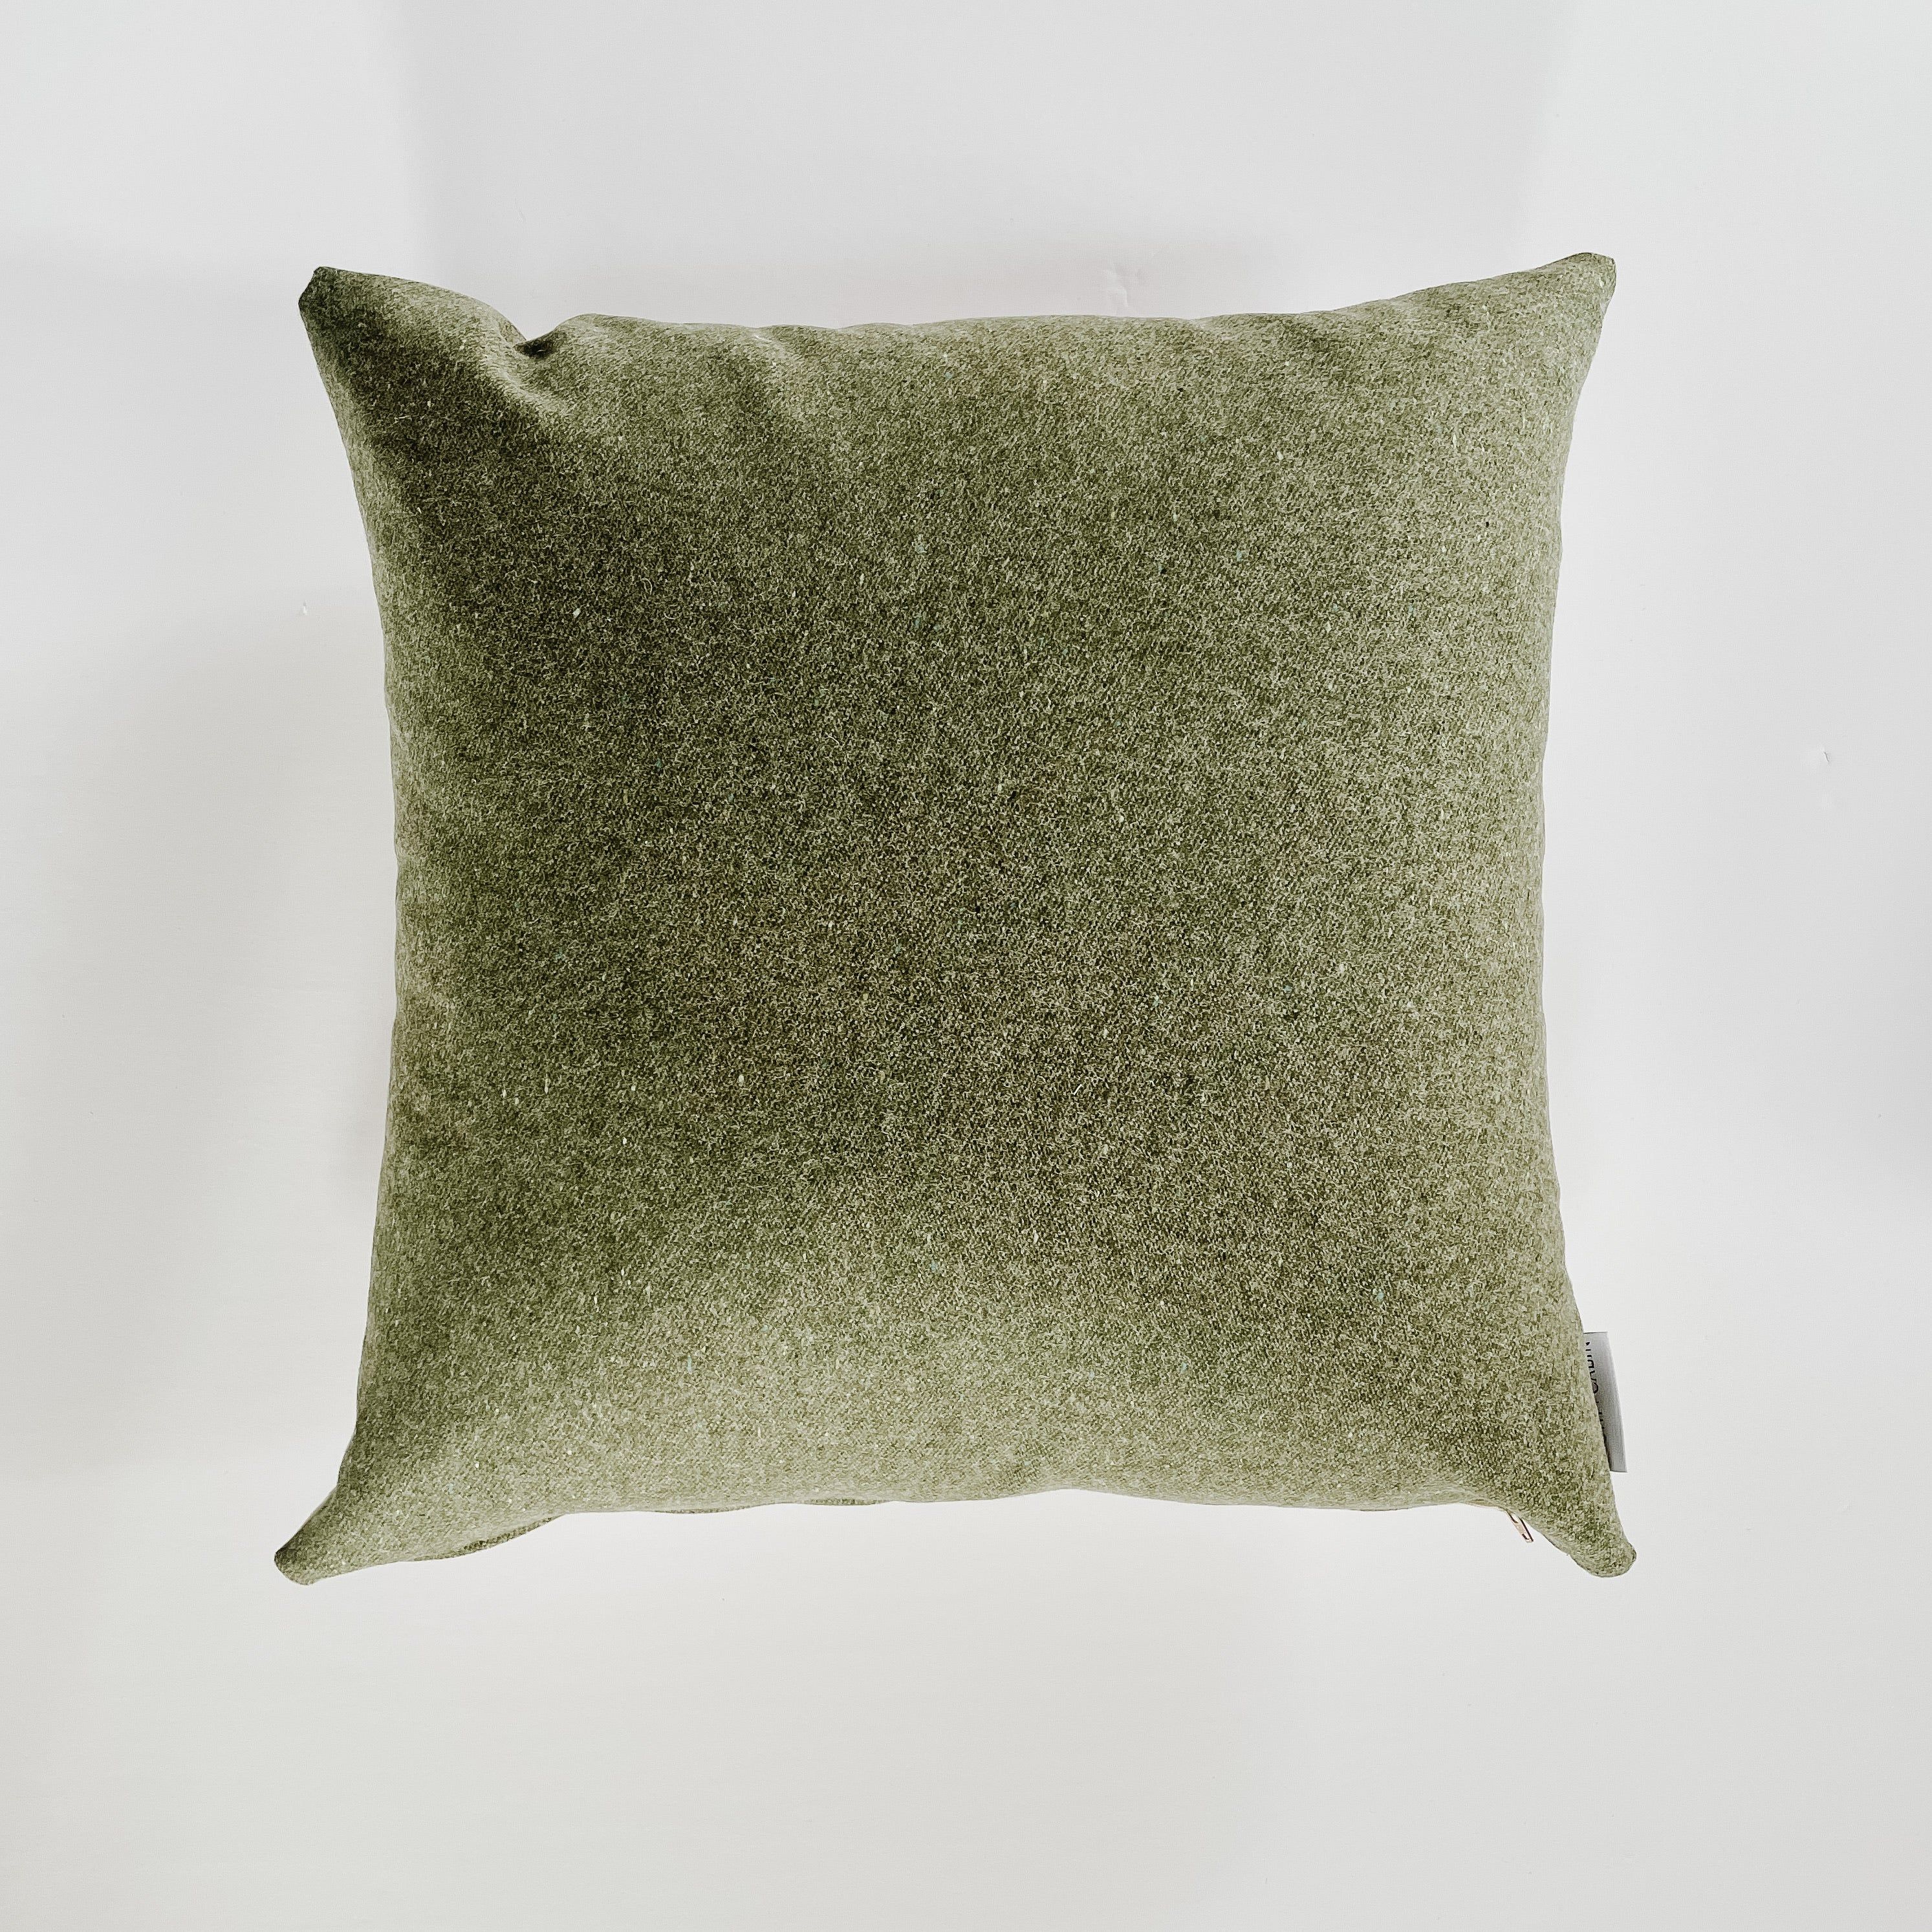 C+C Vintage Forest Tweed Pillow Cover | Cloth + Cabin